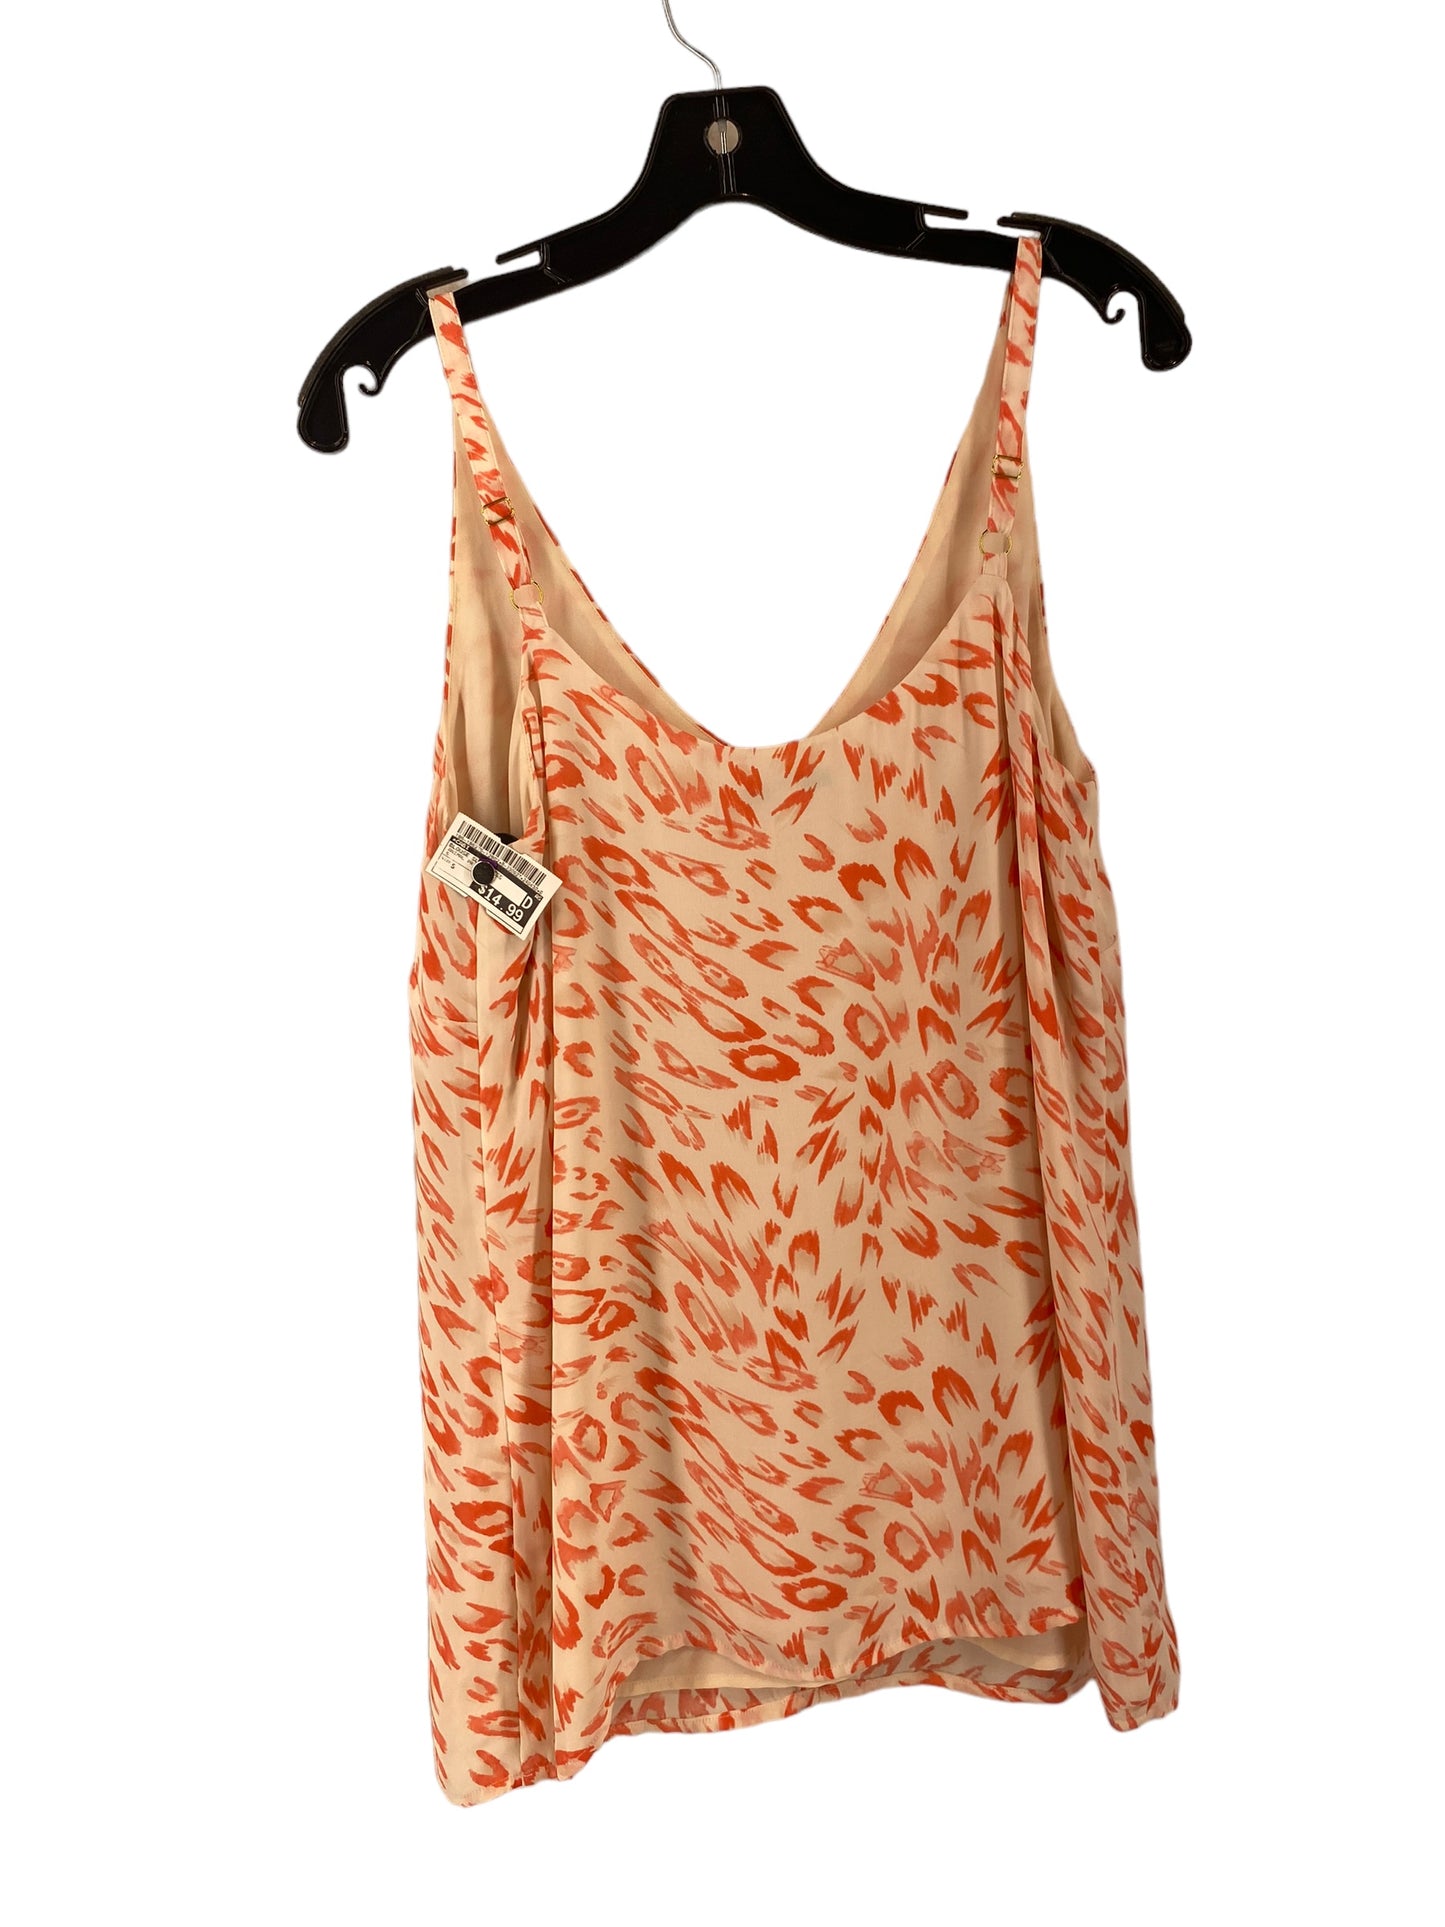 Blouse Sleeveless By Cabi  Size: S